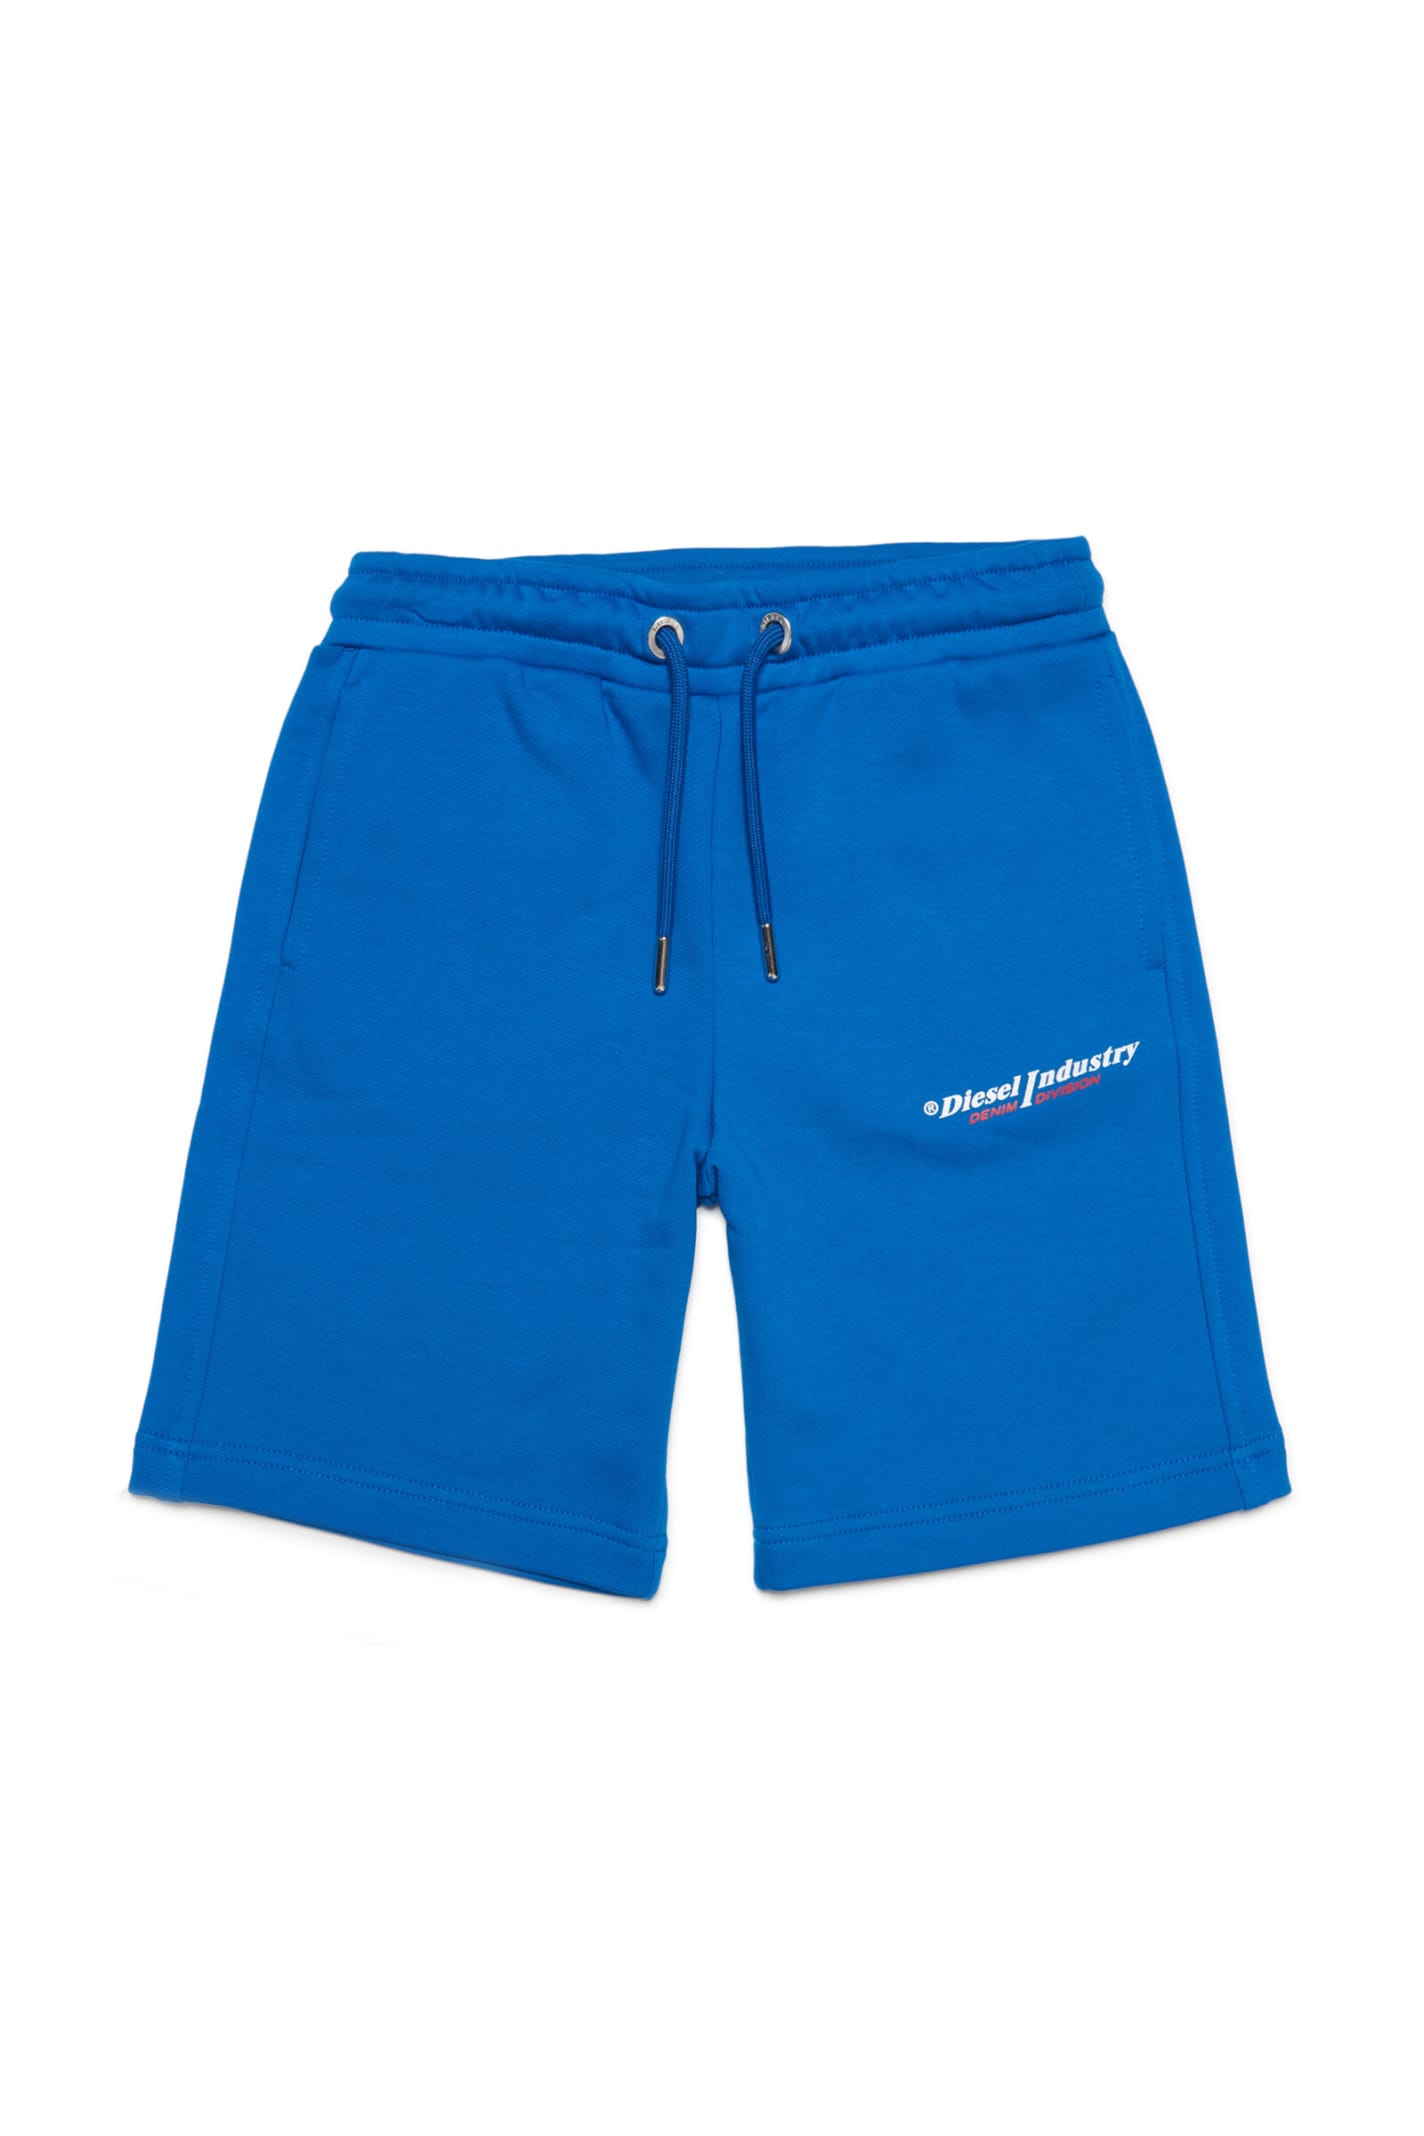 DIESEL PDADOIND SHORTS DIESEL BLUE COTTON SHORTS WITH LOGO AND DRAWSTRING WAISTBAND